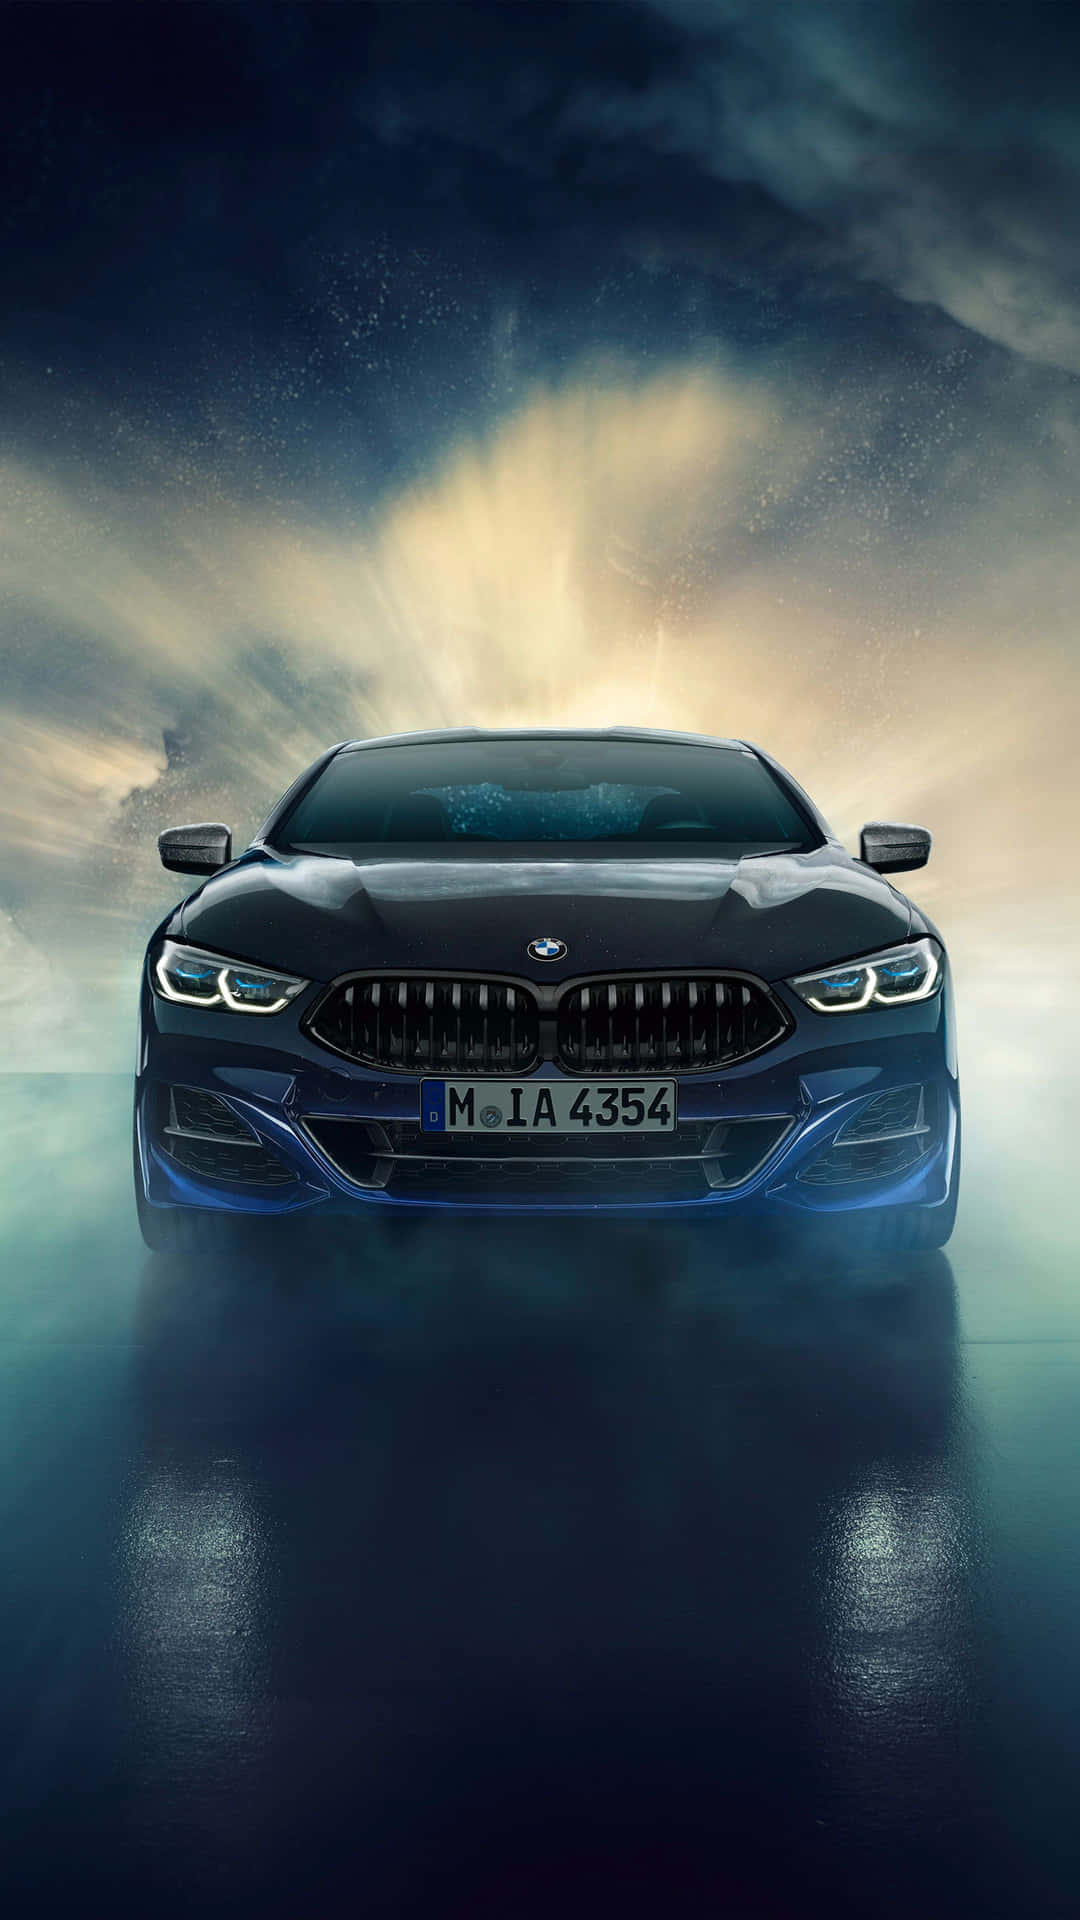 Experience Android in a BMW Wallpaper